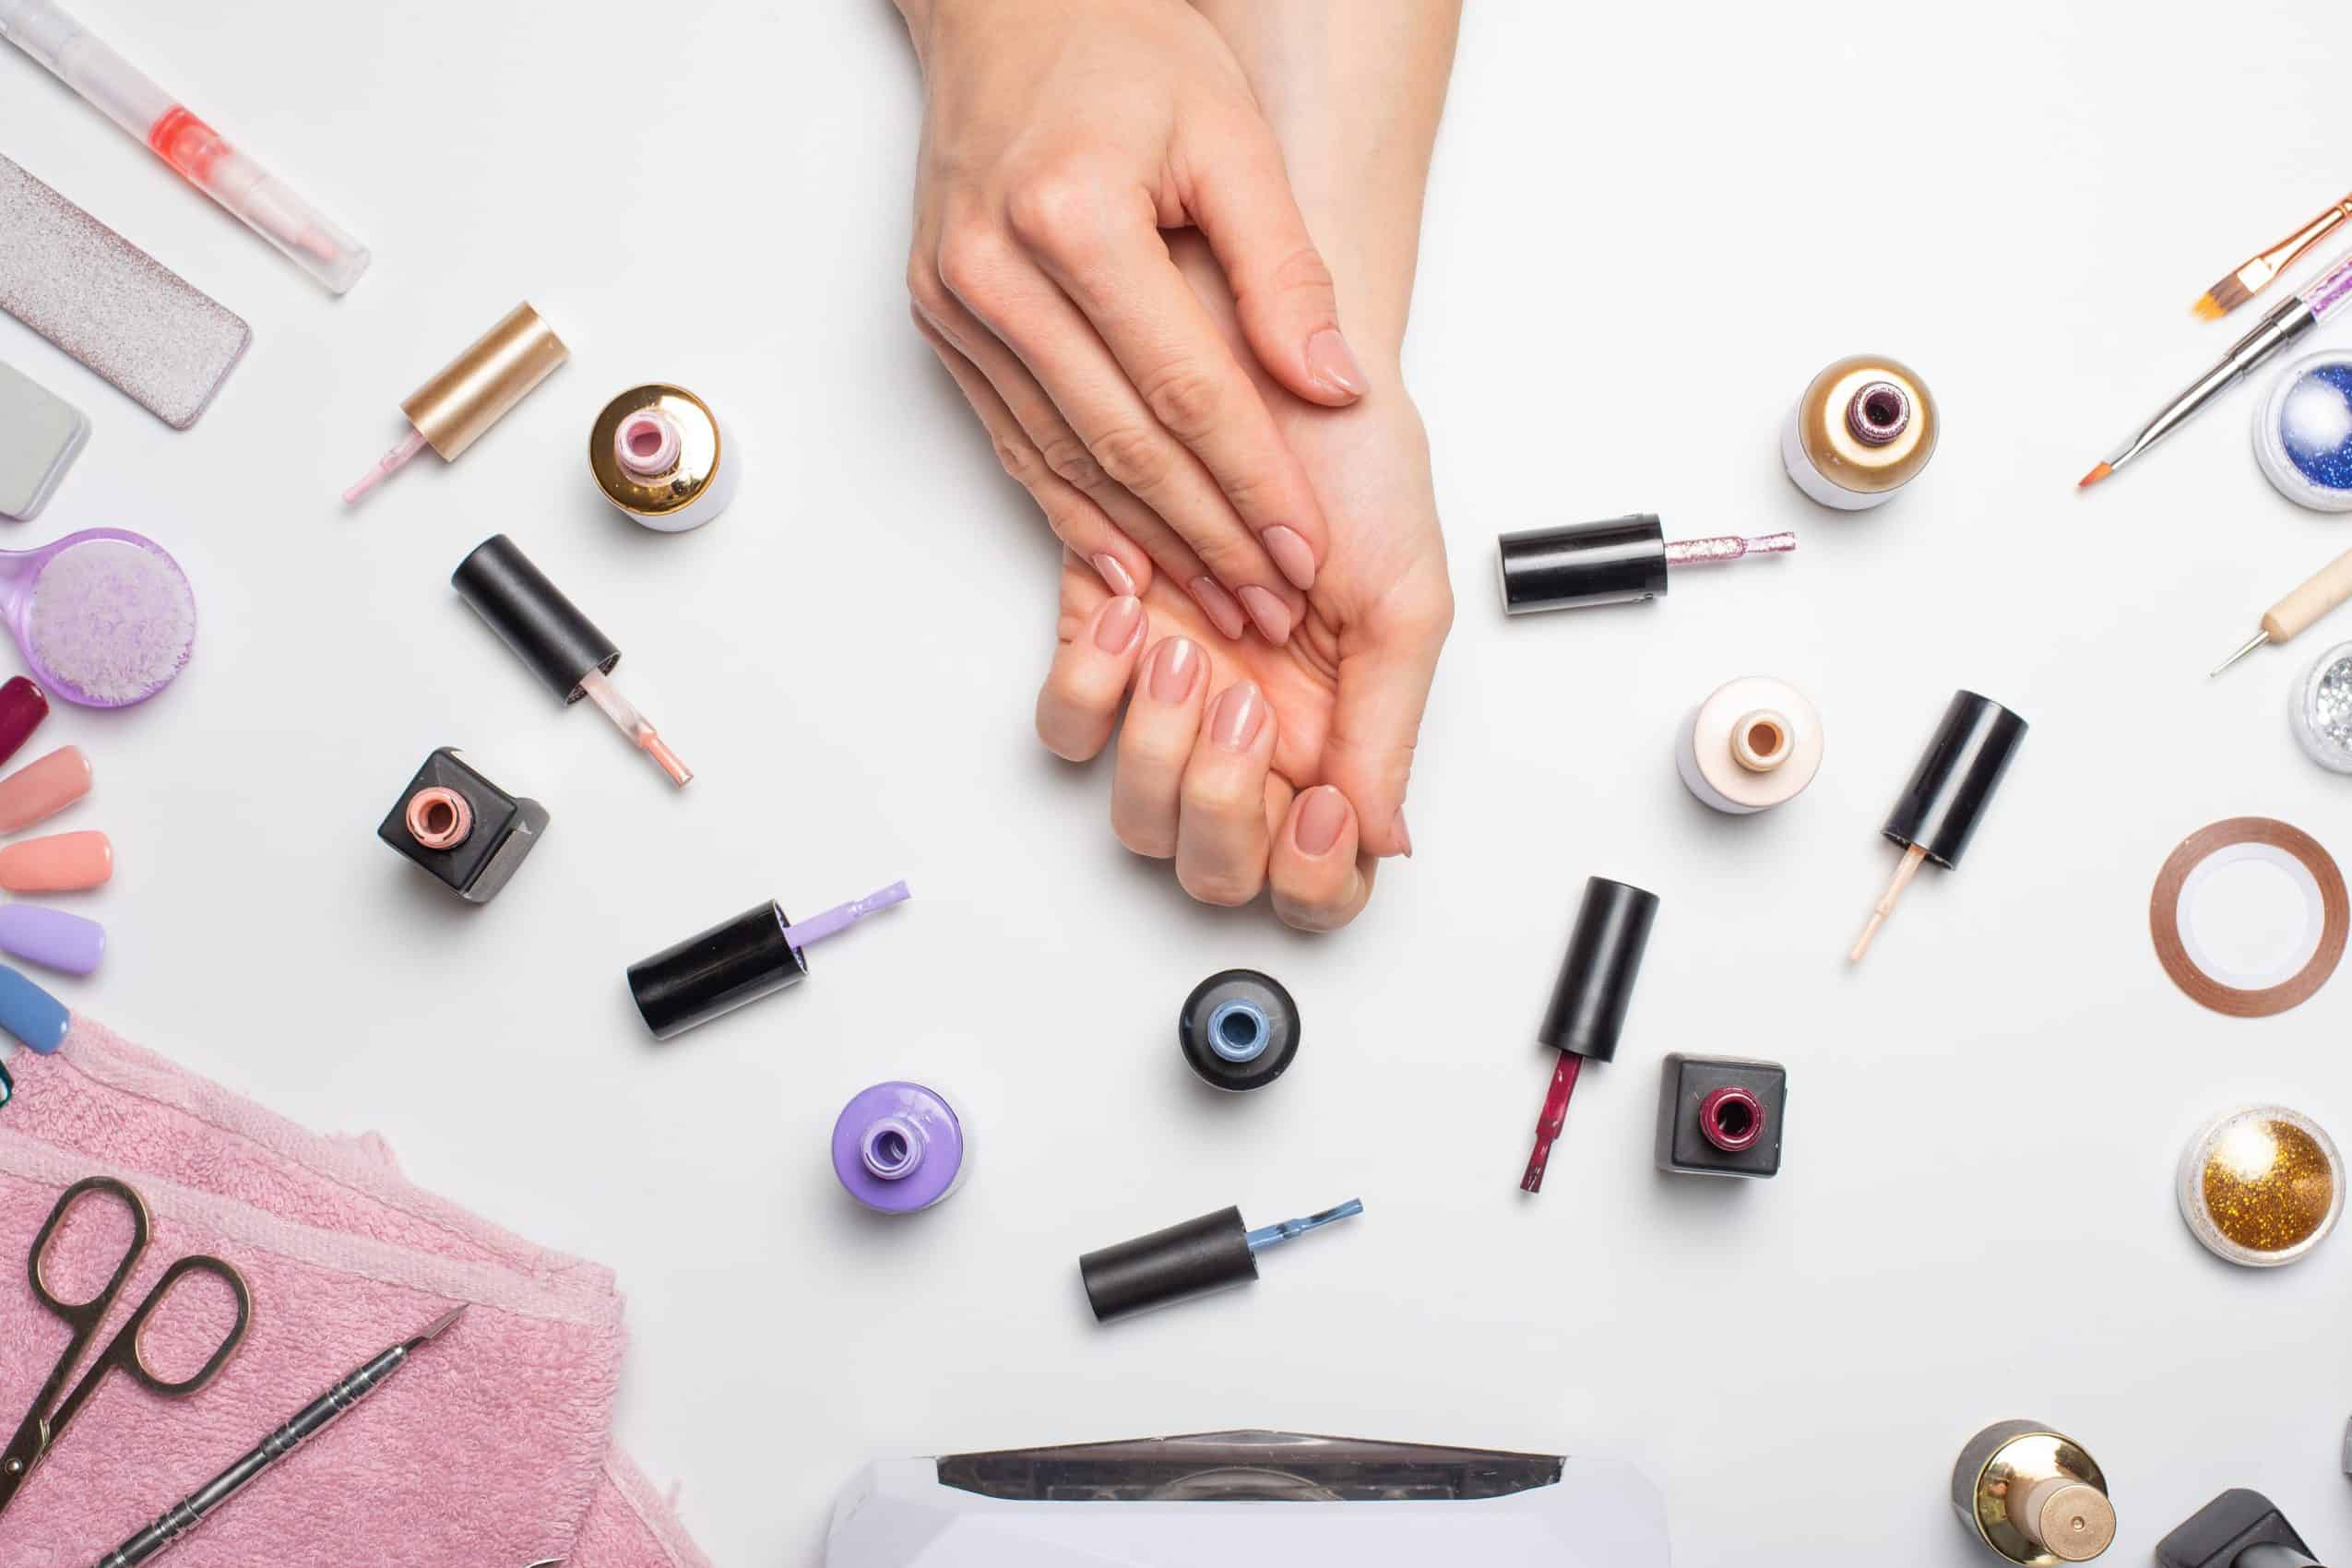 7 Fabulous Manicure Sets to Help You Get Your Talons in Order